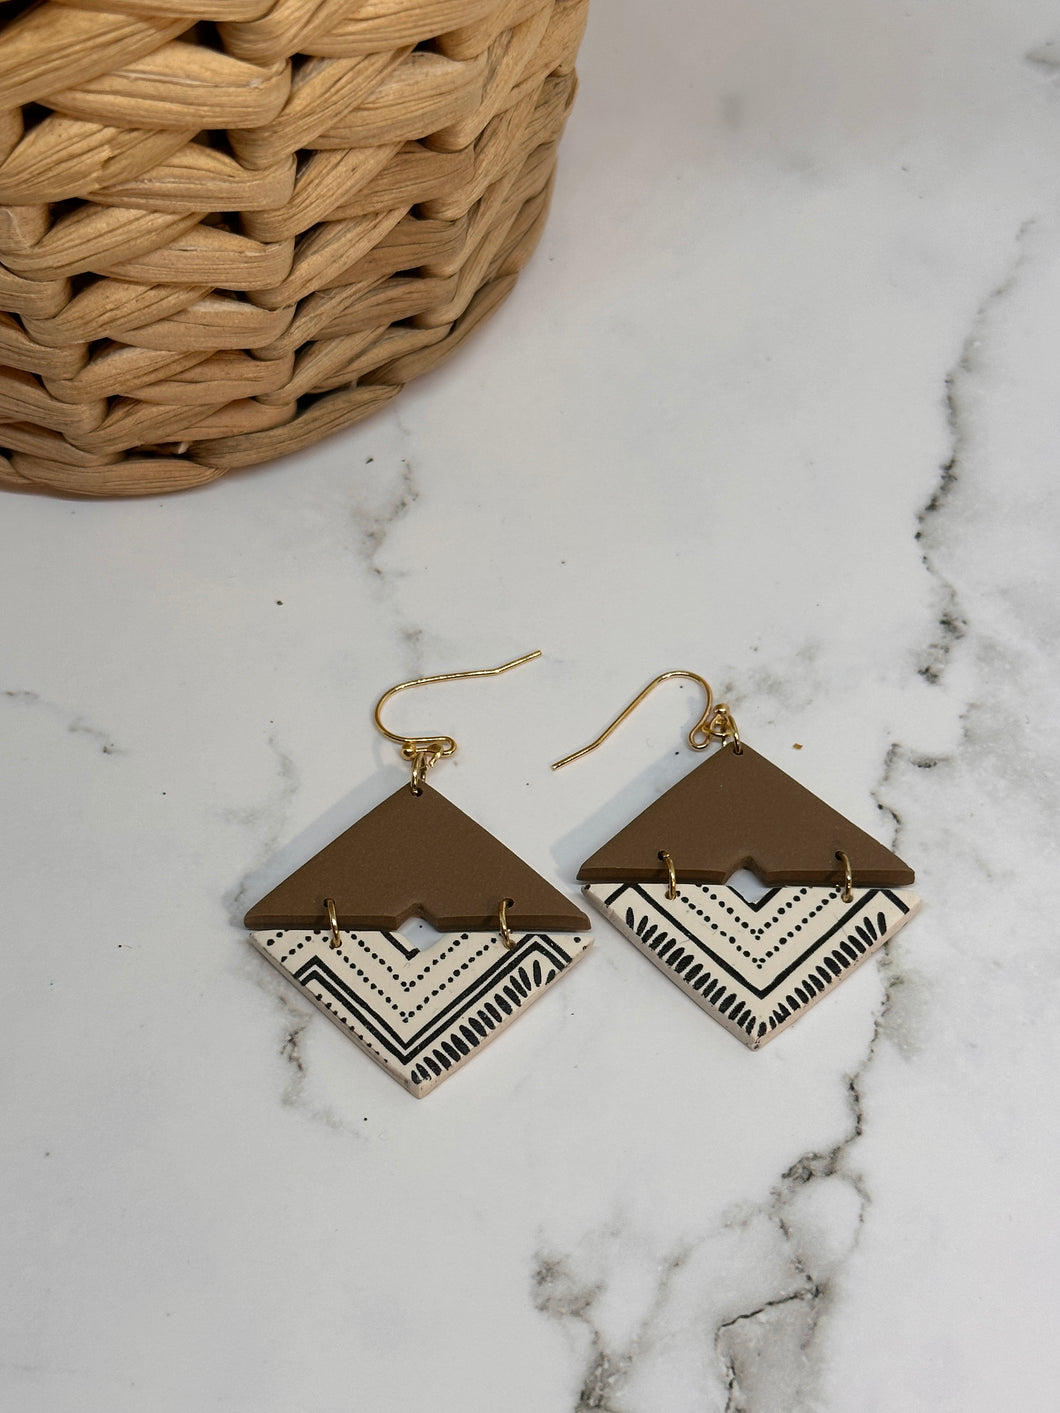 Off white and brown diamond earrings